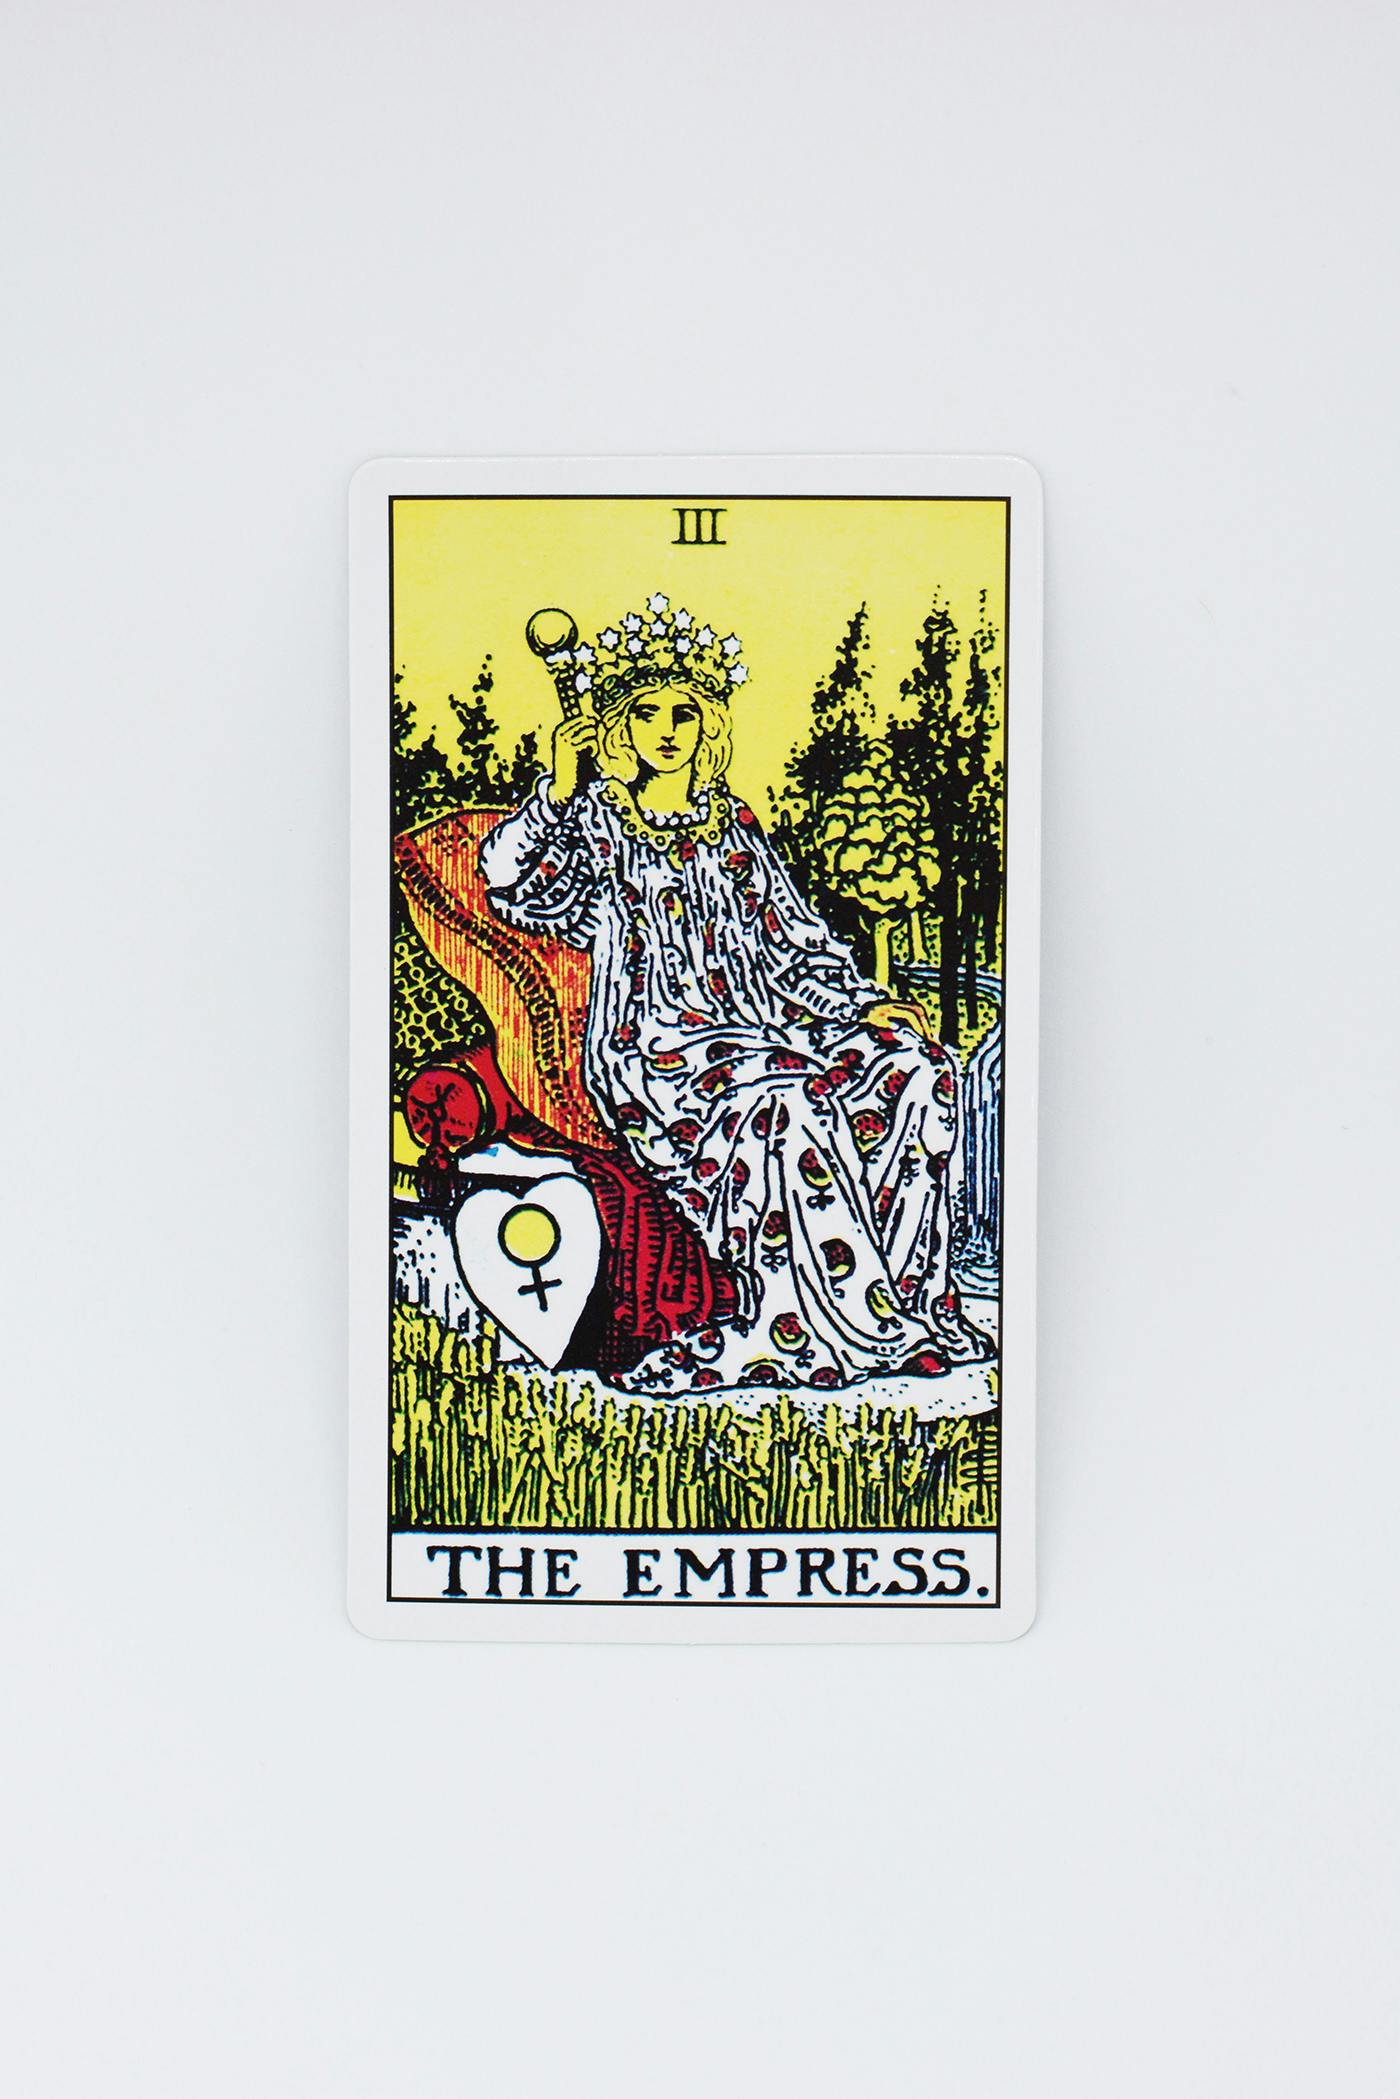 The empress tarot card. Features a women sitting on a throne wearing a crown and holding a crystal wand.